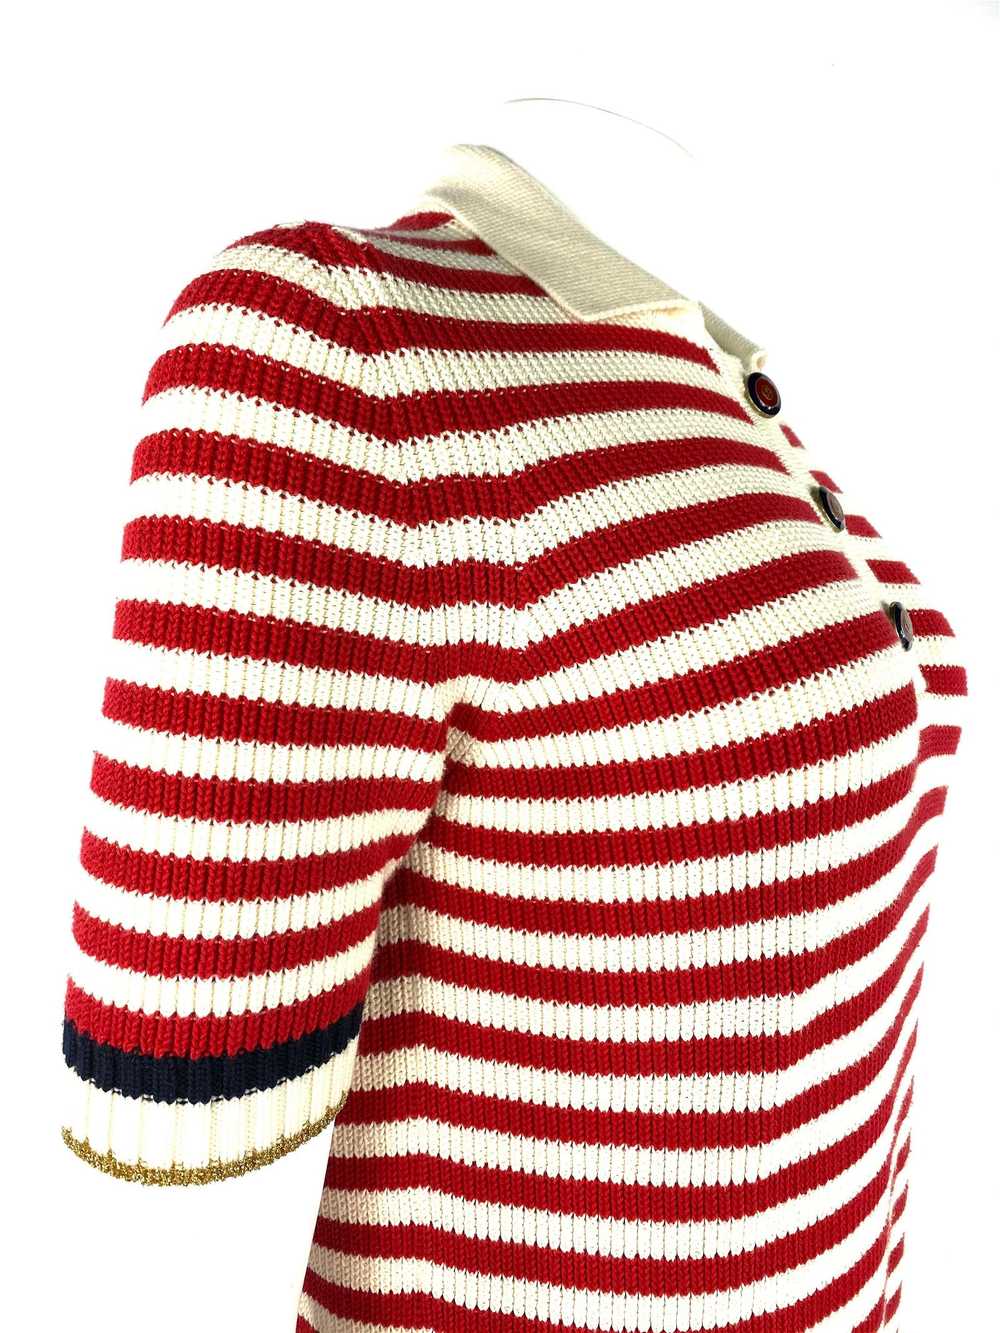 Gucci Red and White Wool Knit Sweater Top - image 11